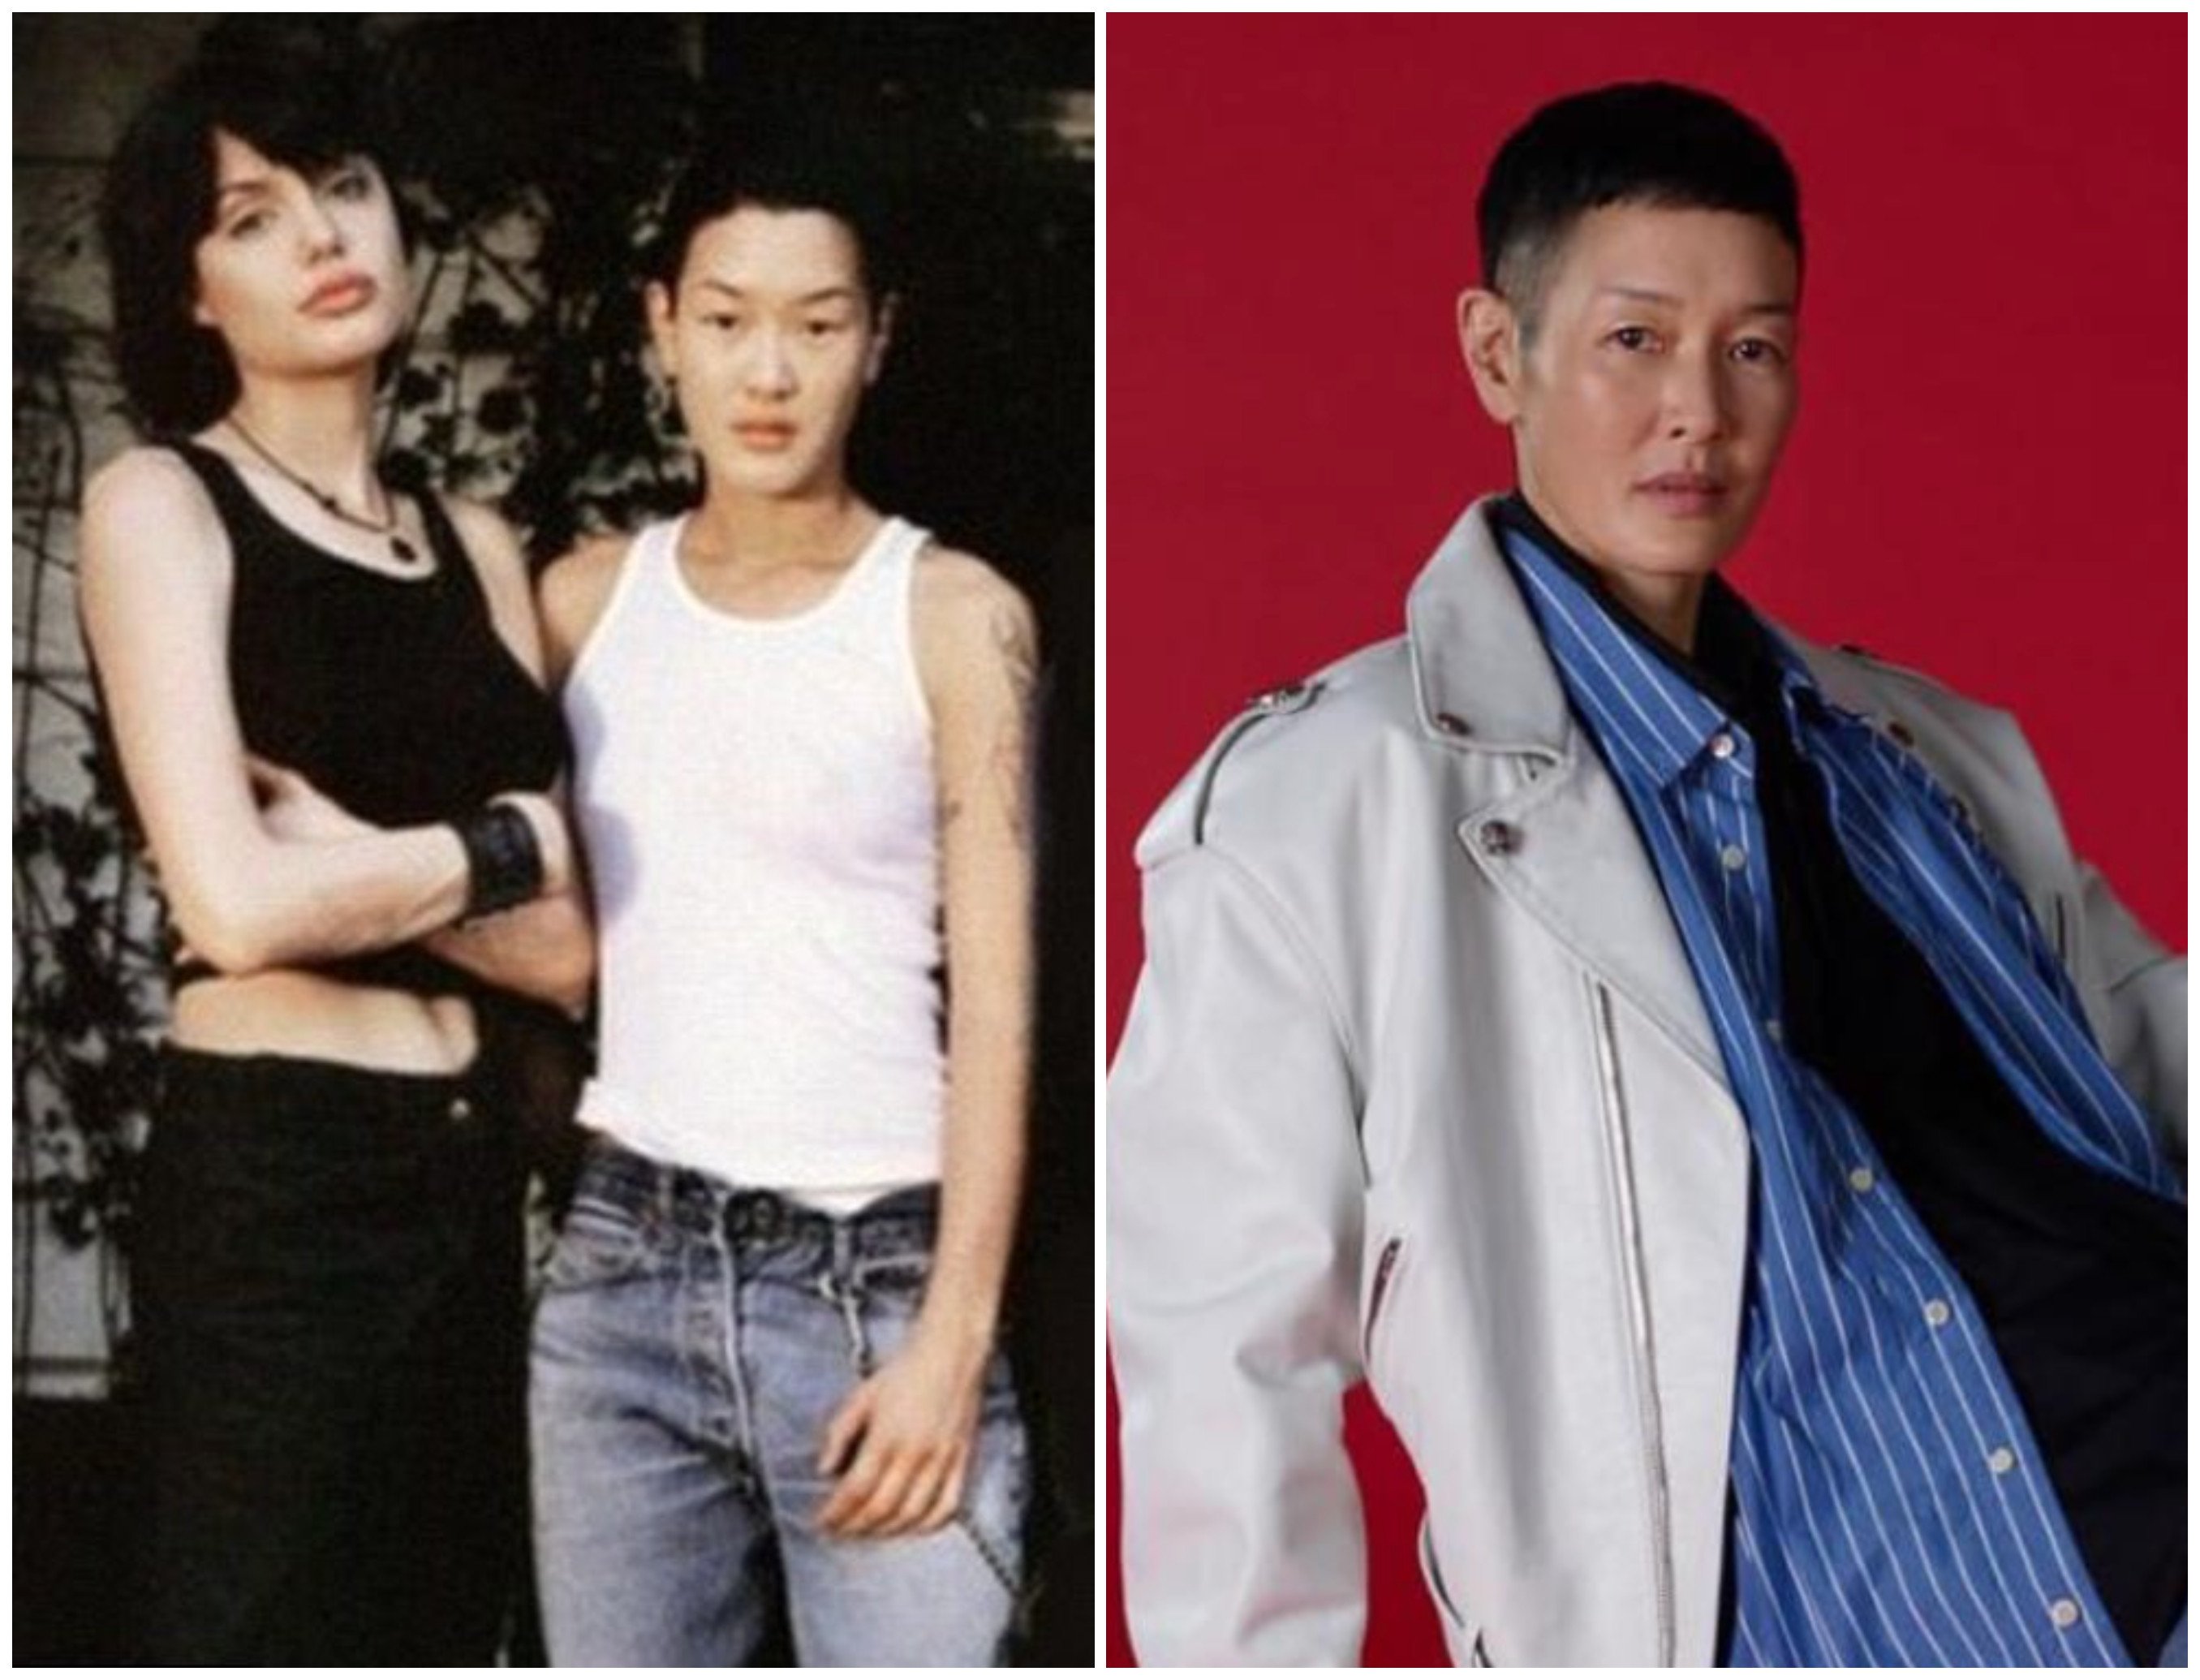 CK One model Jenny Shimizu dated Angelina Jolie for several years after the pair met on a film set. Photos: @ariasagay/X; @jennyshimizu/Instagram